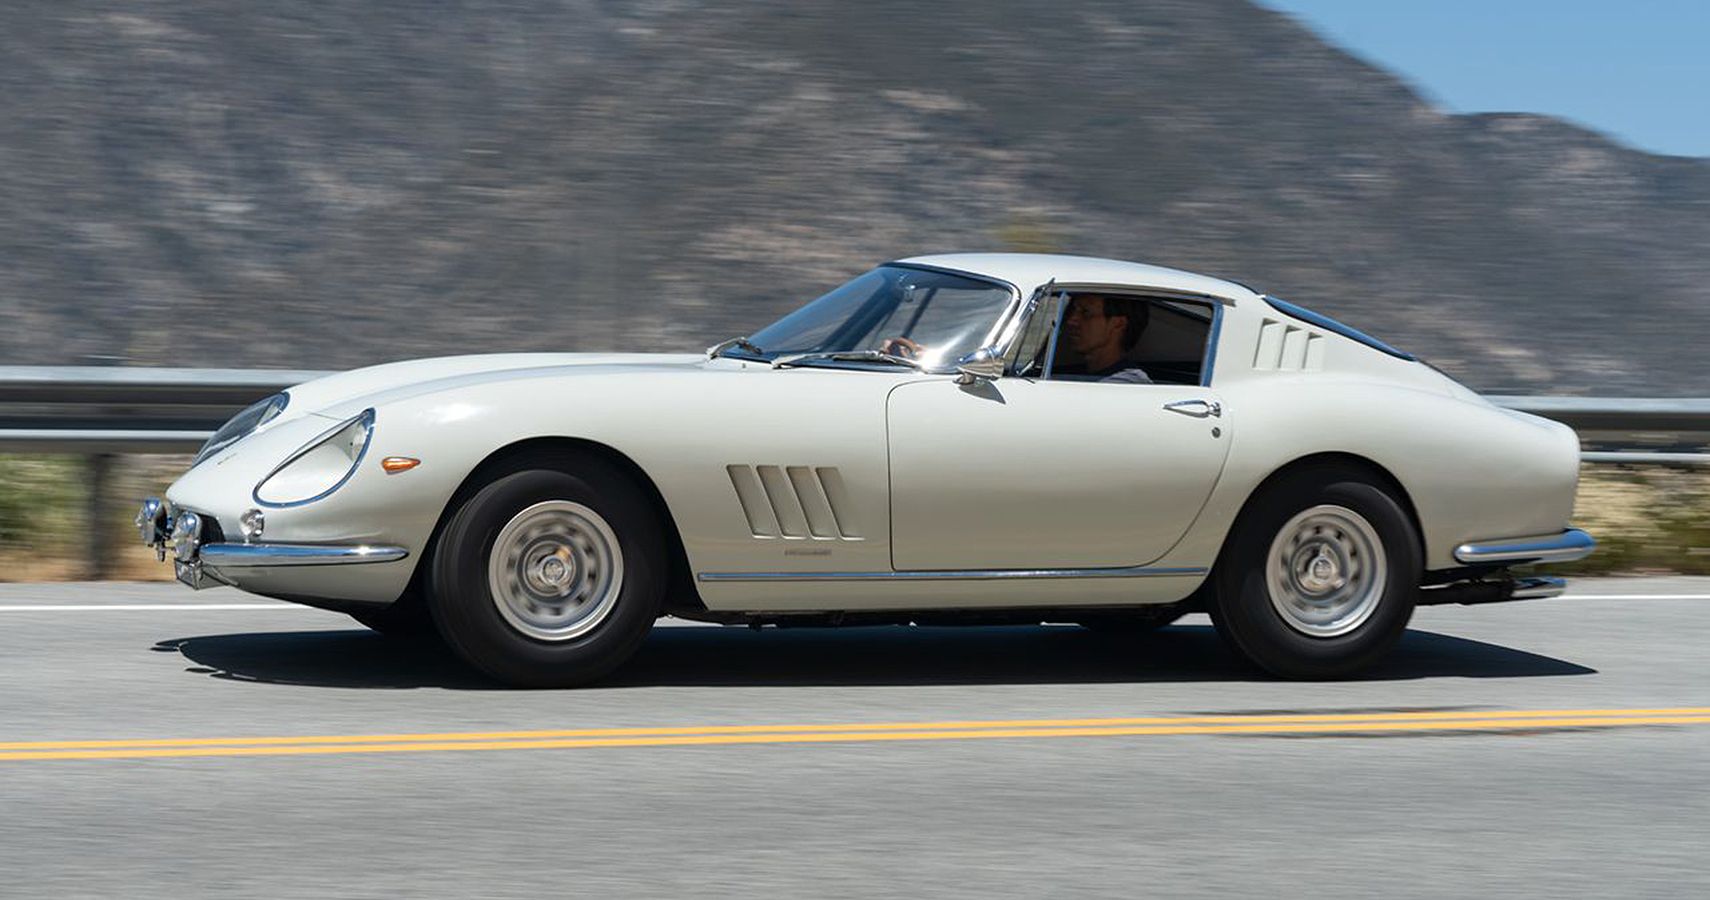 A 1966 275 GTB Long-Nose Sold For $3.08 Million At Gooding & Company Online Auction In 2020 Making It The Most Expensive Car To Be Sold Online